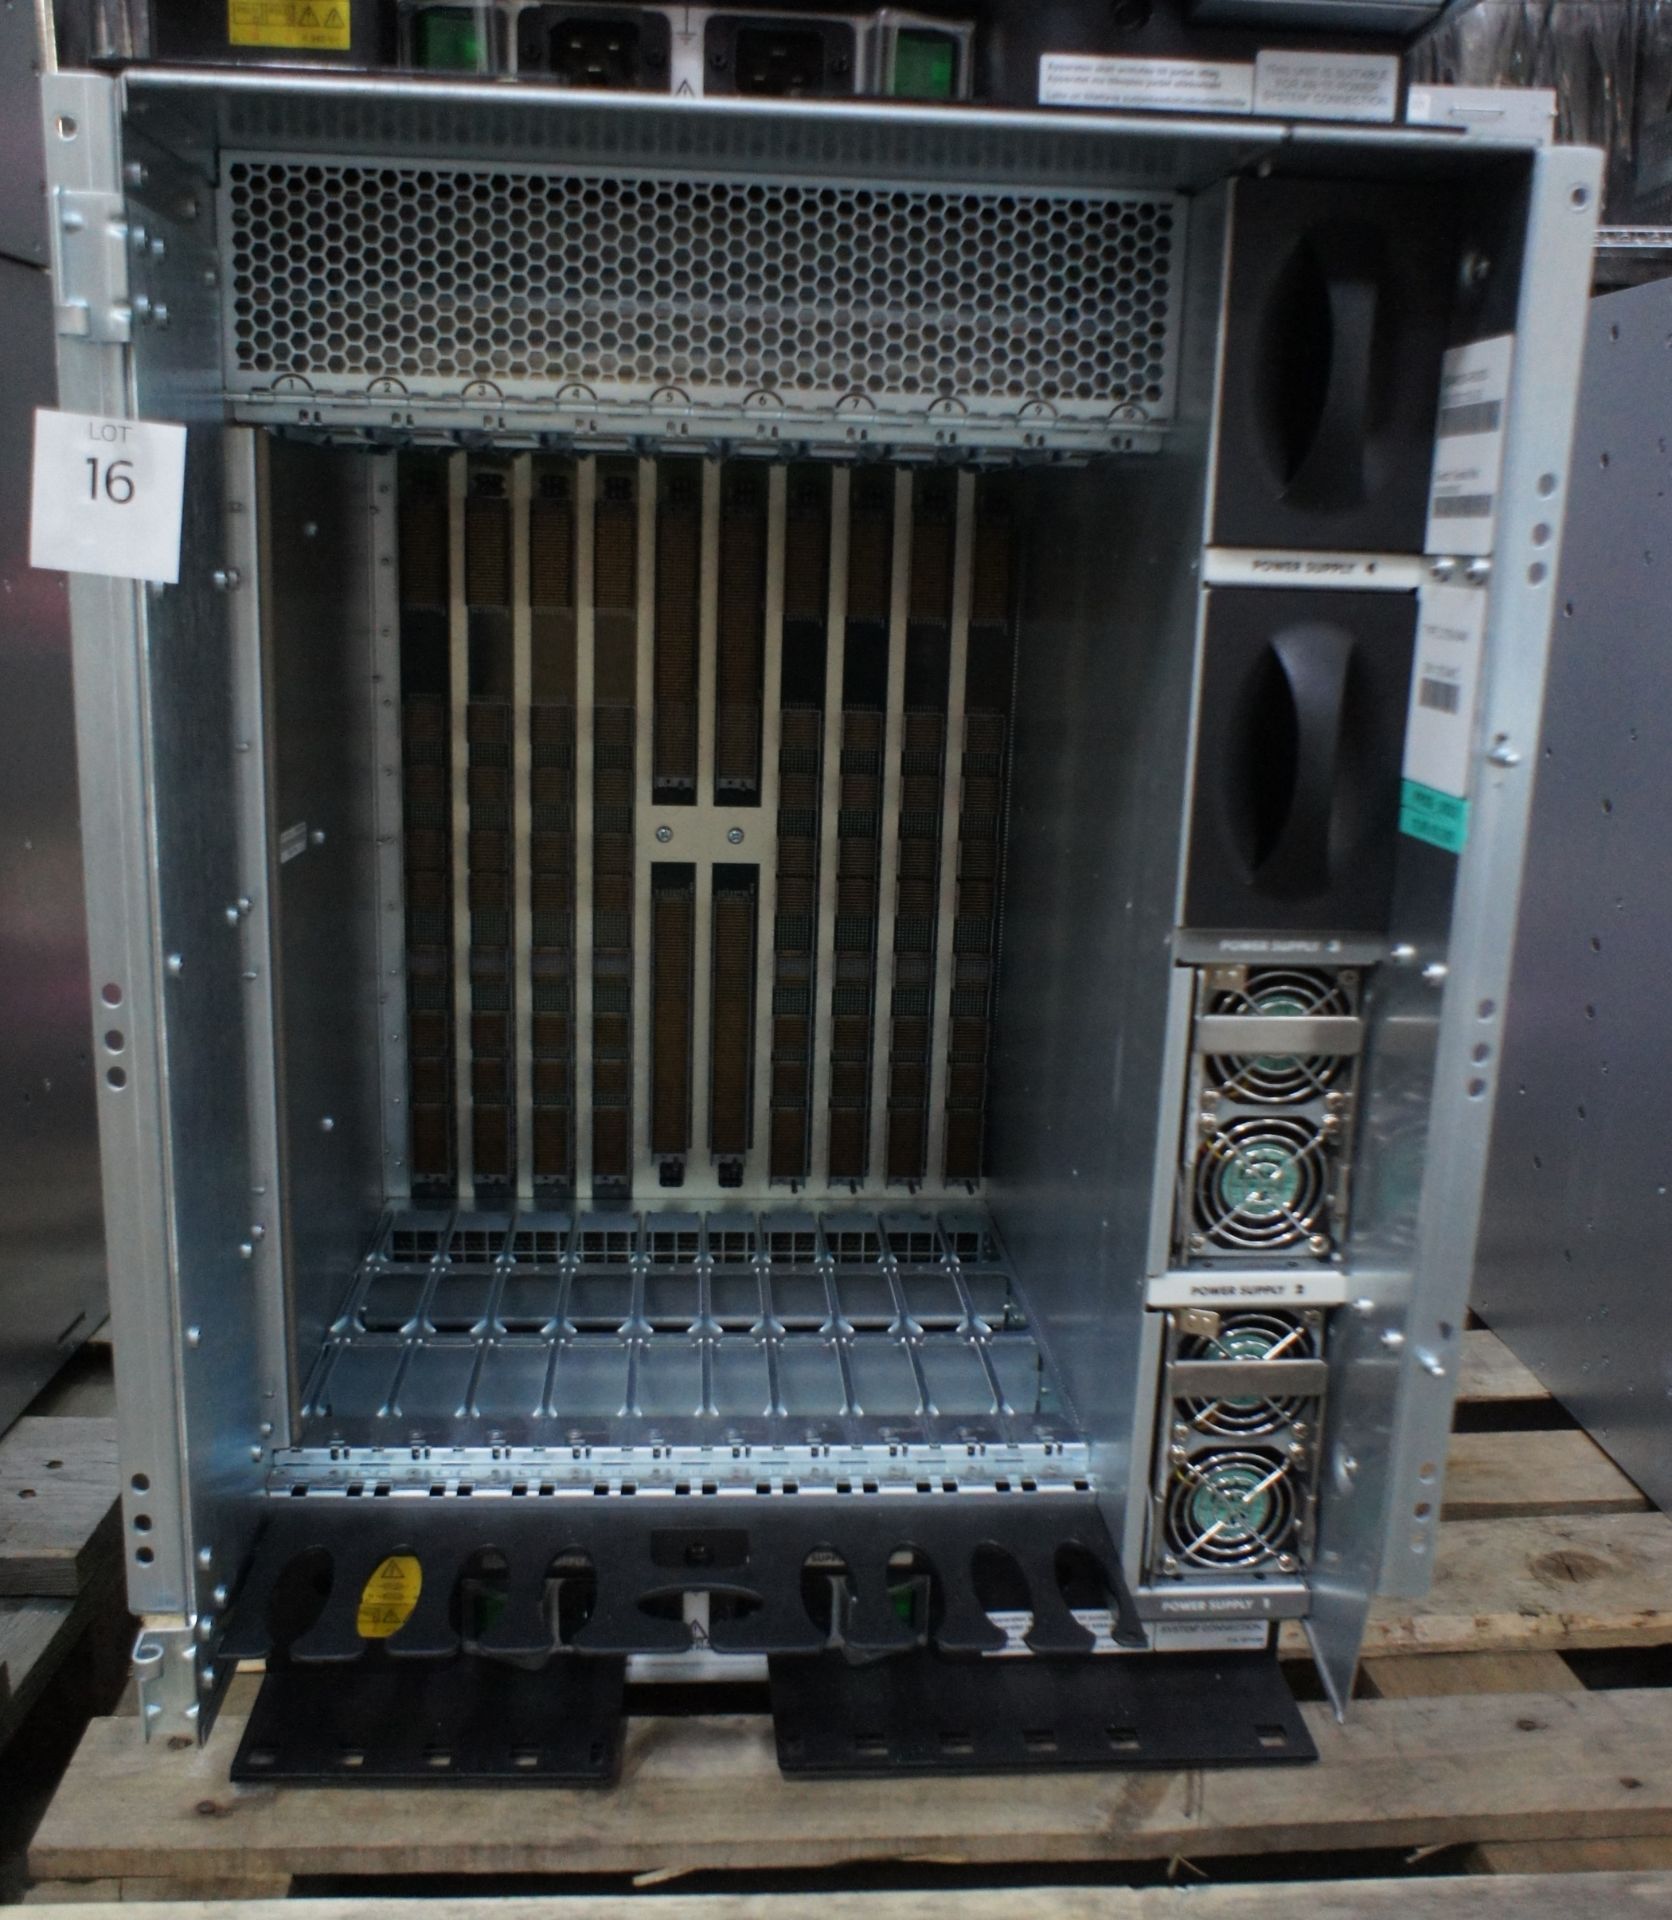 IBM2109-M48 SAN256 director cabinet with 8x FC4/32 cards and 1x CP4 cards, IBM2109-M48 SAN256 - Image 19 of 35